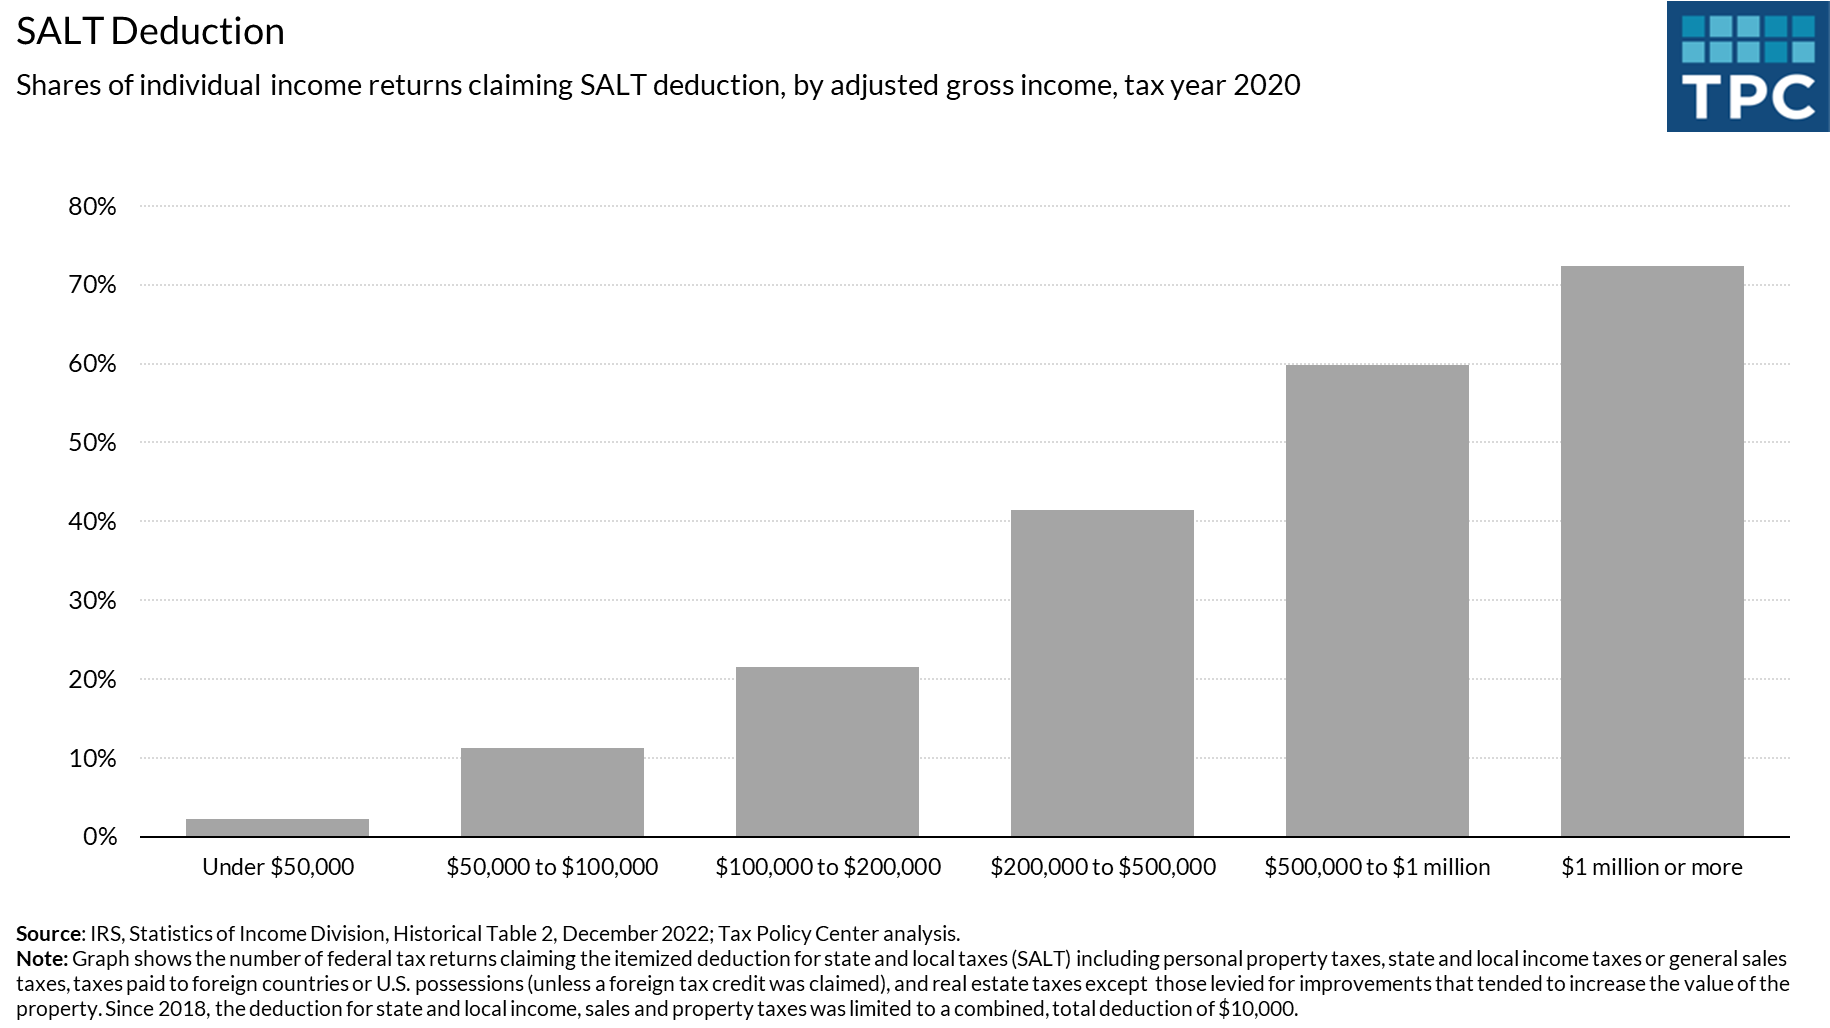 15.4 million tax returns claimed the itemized deduction for state and local taxes paid in 2020. Among those with incomes over $1 million, 72% claimed the SALT deduction, compared with 2% of those with incomes below $50,000.